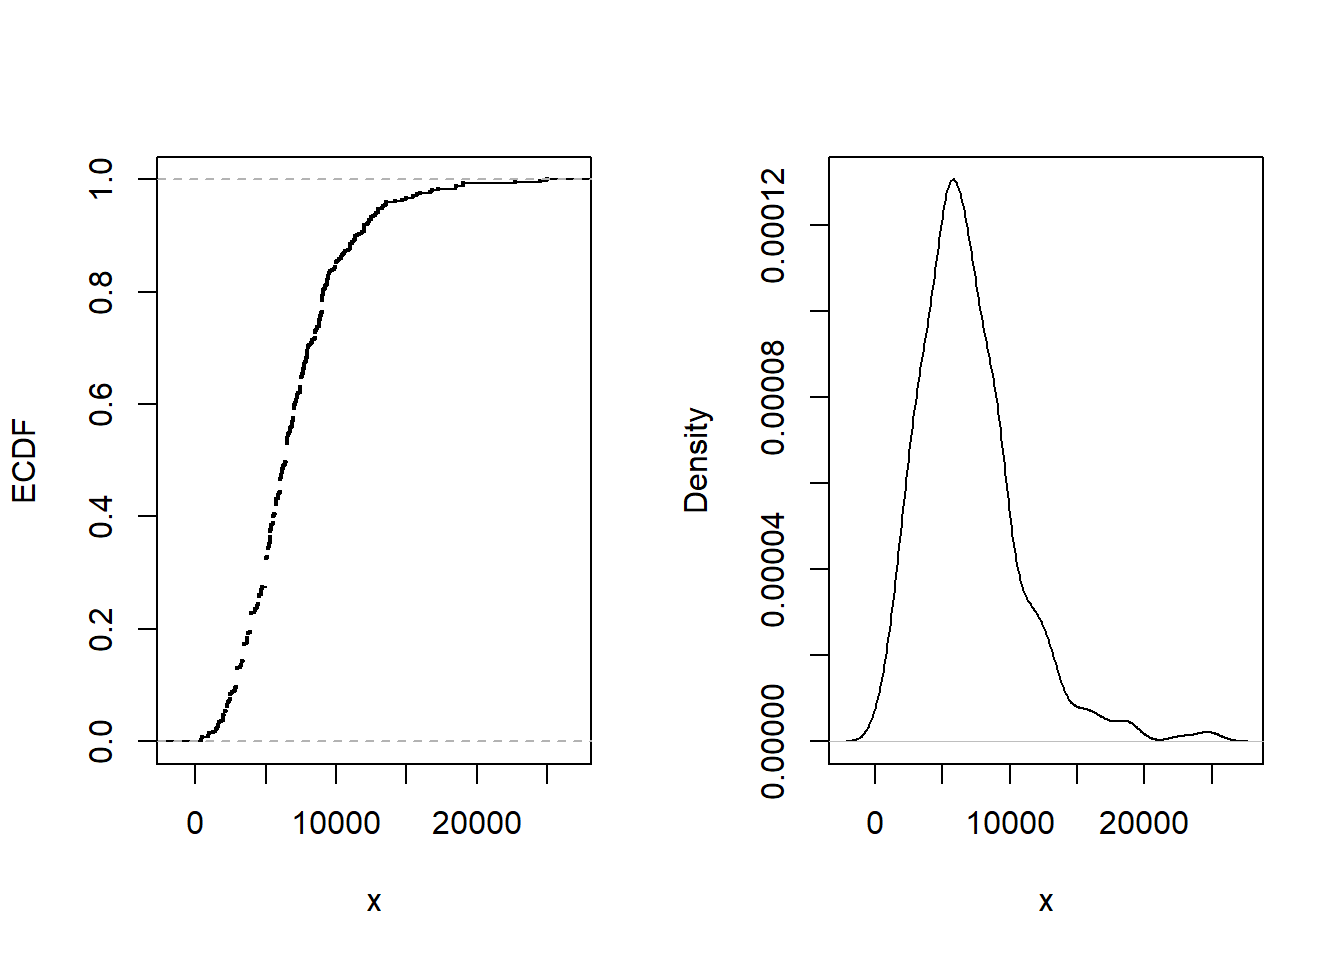 Bodily Injury Claims. The left-hand panel gives the empirical distribution function. The right-hand panel presents a nonparametric density plot.